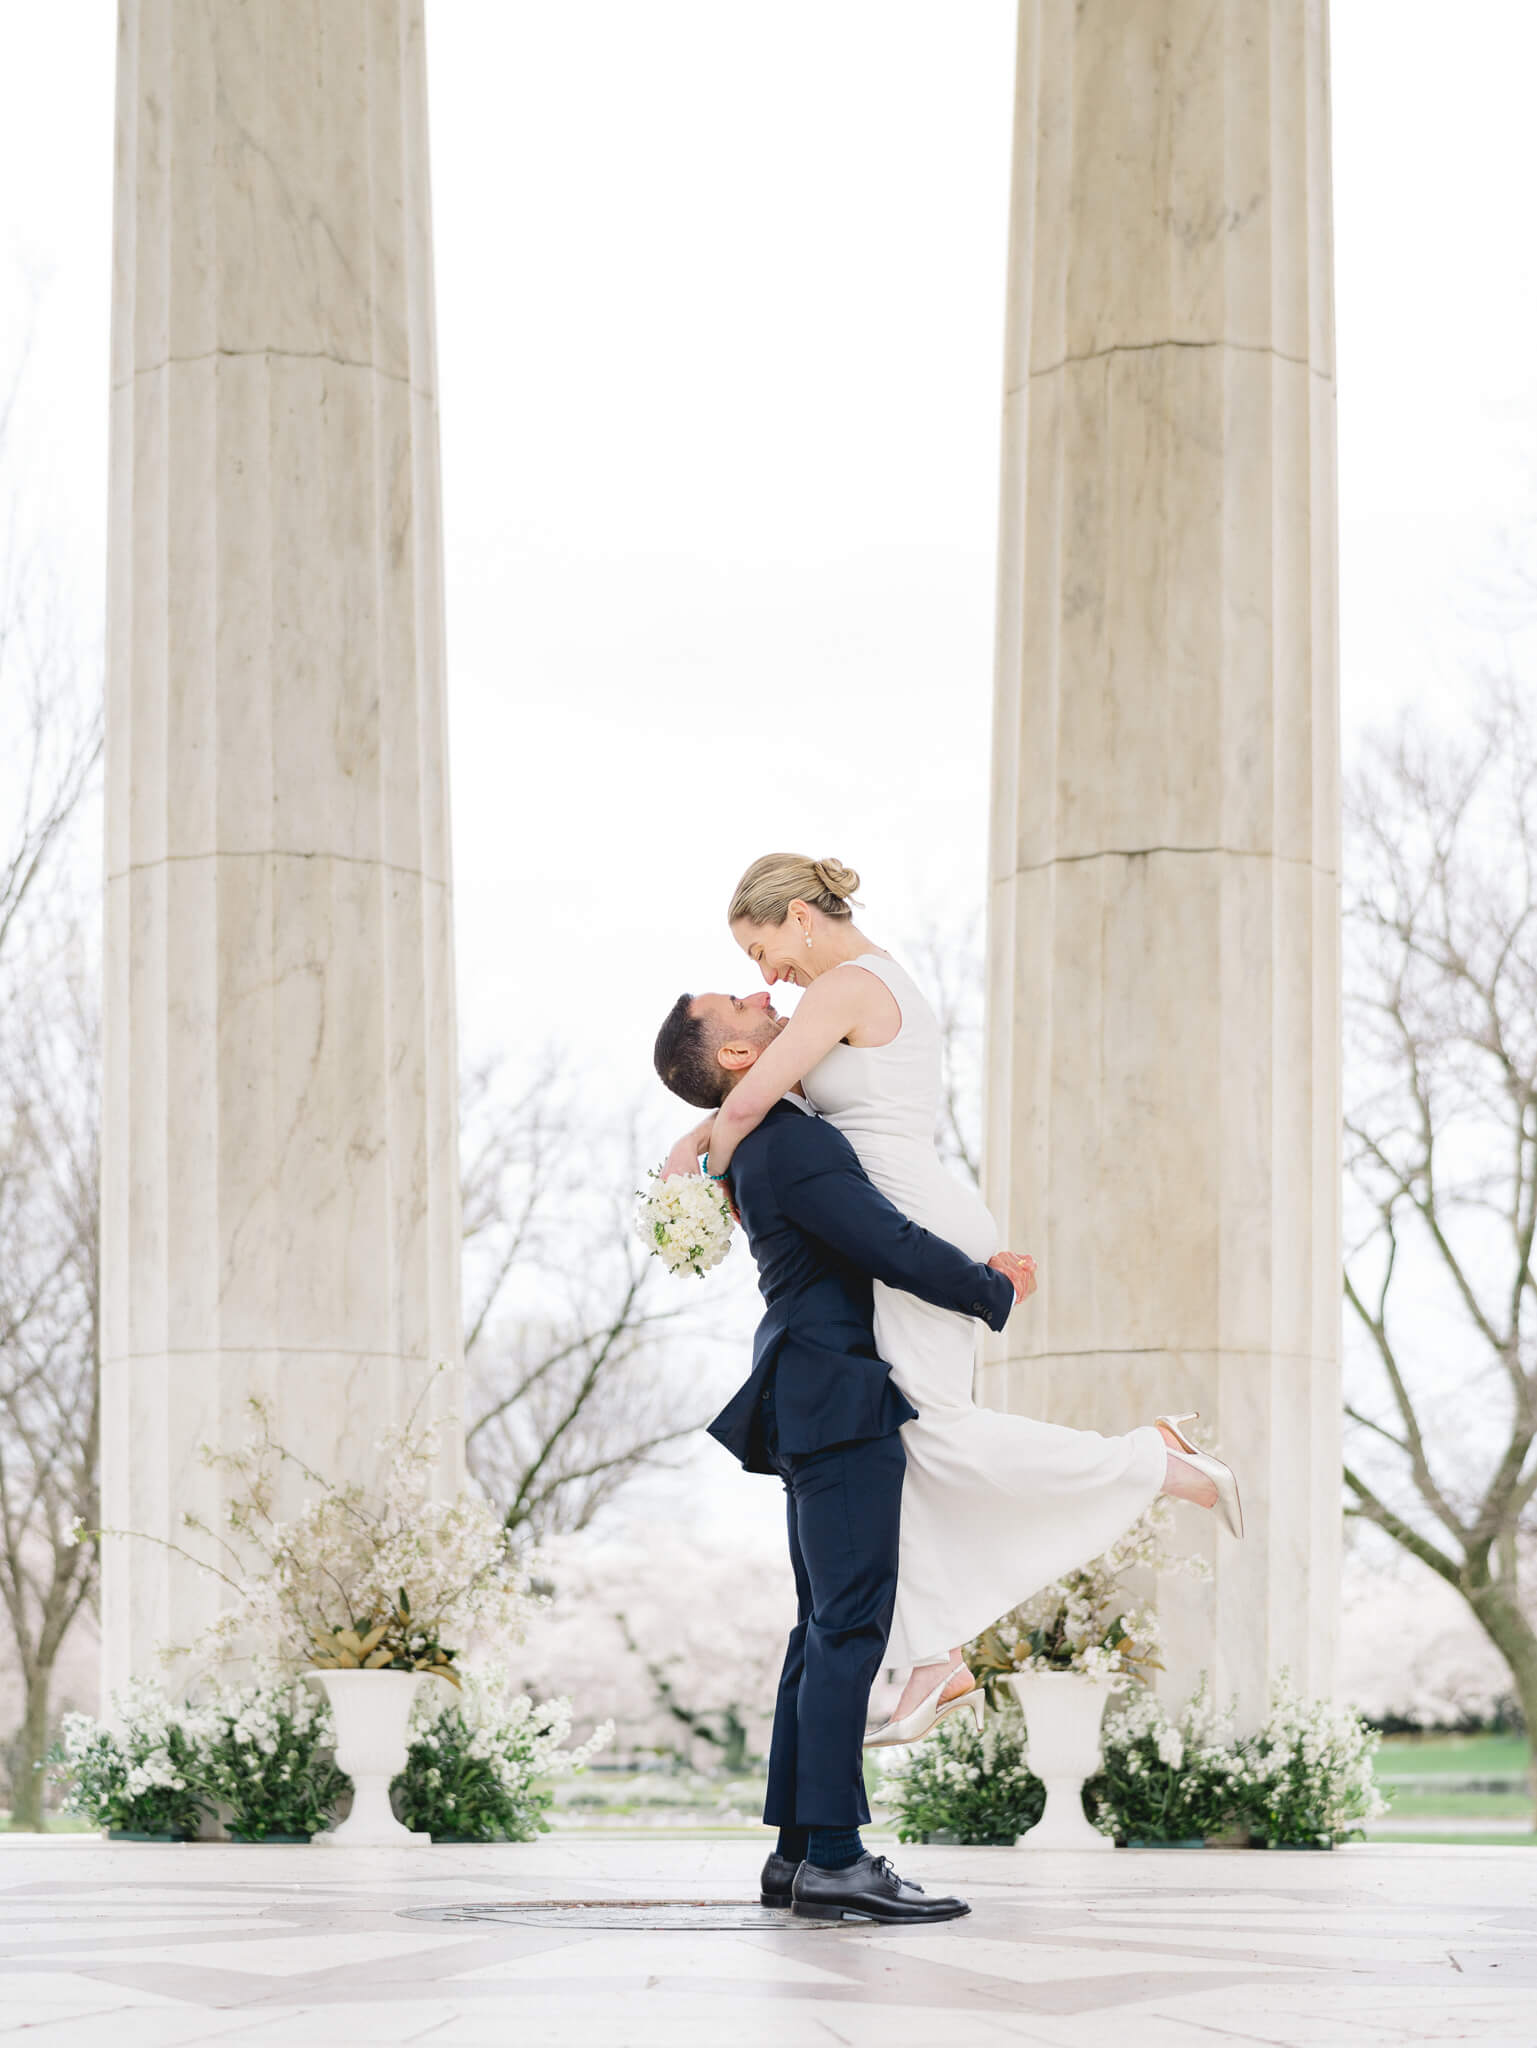 A groom picking up his bride after their cherry blossom elopement at the D.C. War Memorial